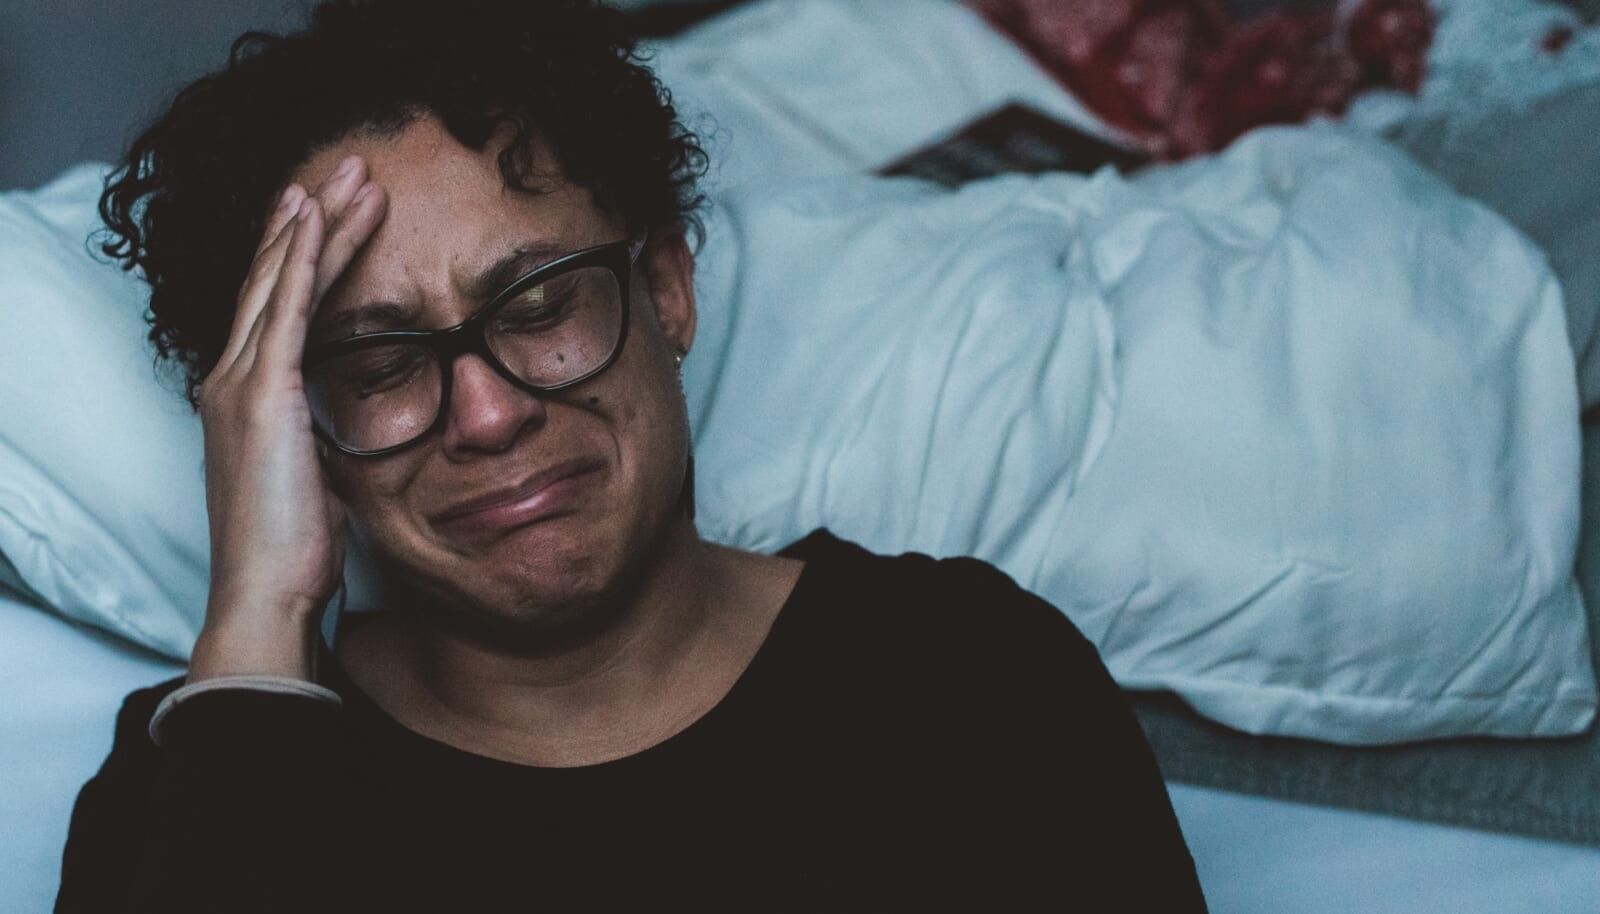 woman cries on the floor leaning against bed